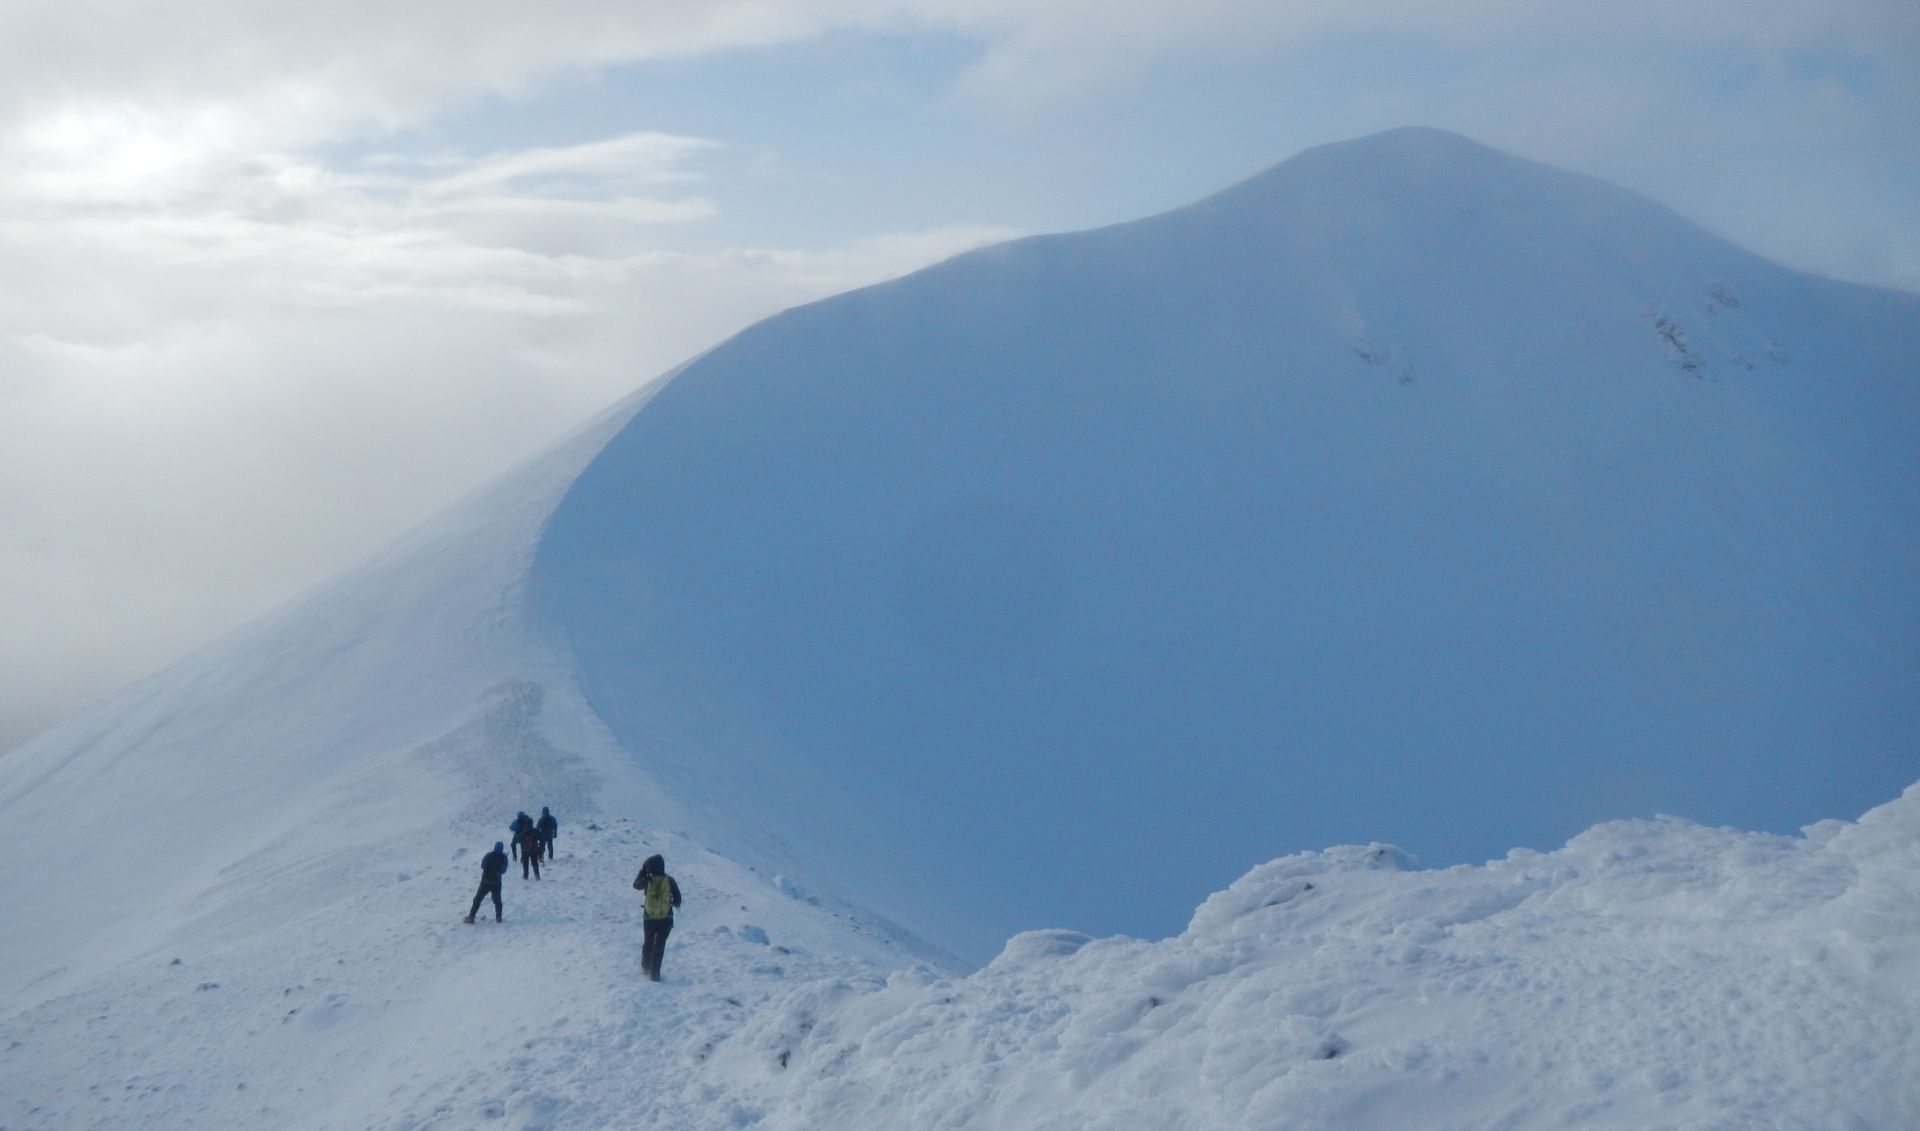 Carlisle group on Sgorr Dhonuill above ballachulish during a Scottish winter meet in 2018